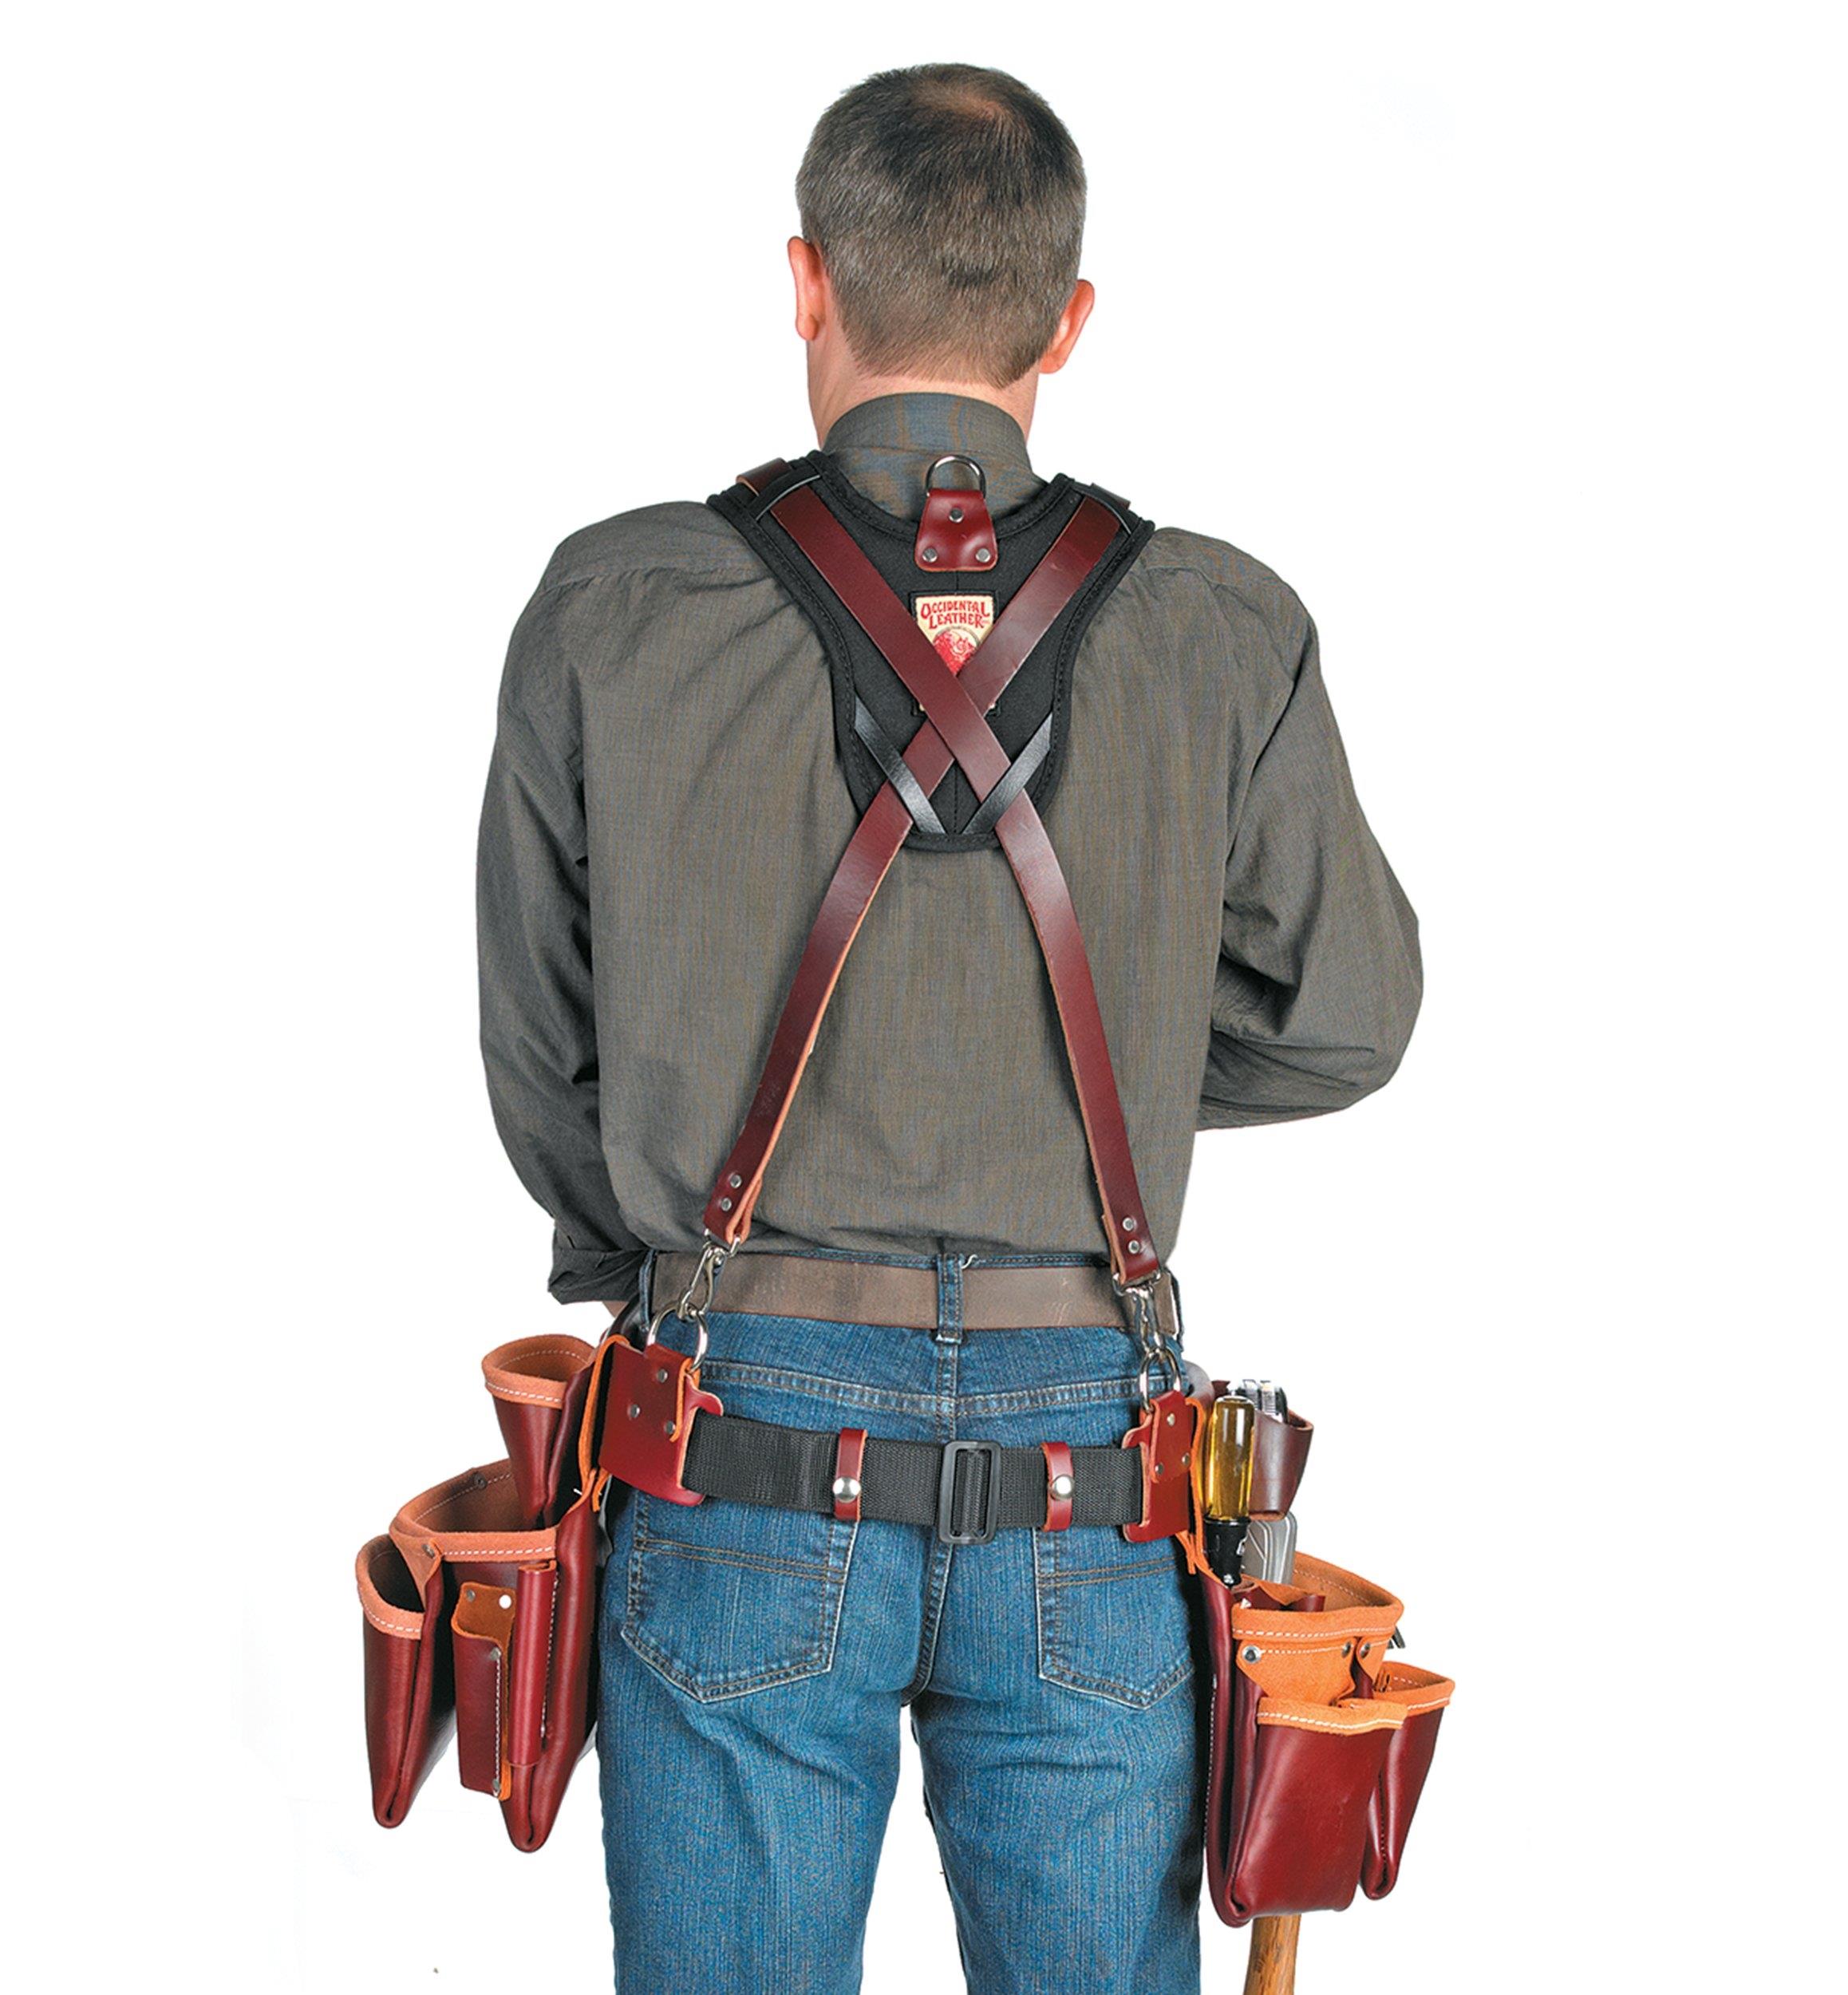 Occidental Leather 9540 Adjust-to-Fit Finisher Tool Belt Set Bundle w  (2) Pack 2003 Oxy Tool Shield (3 Pieces) - 4